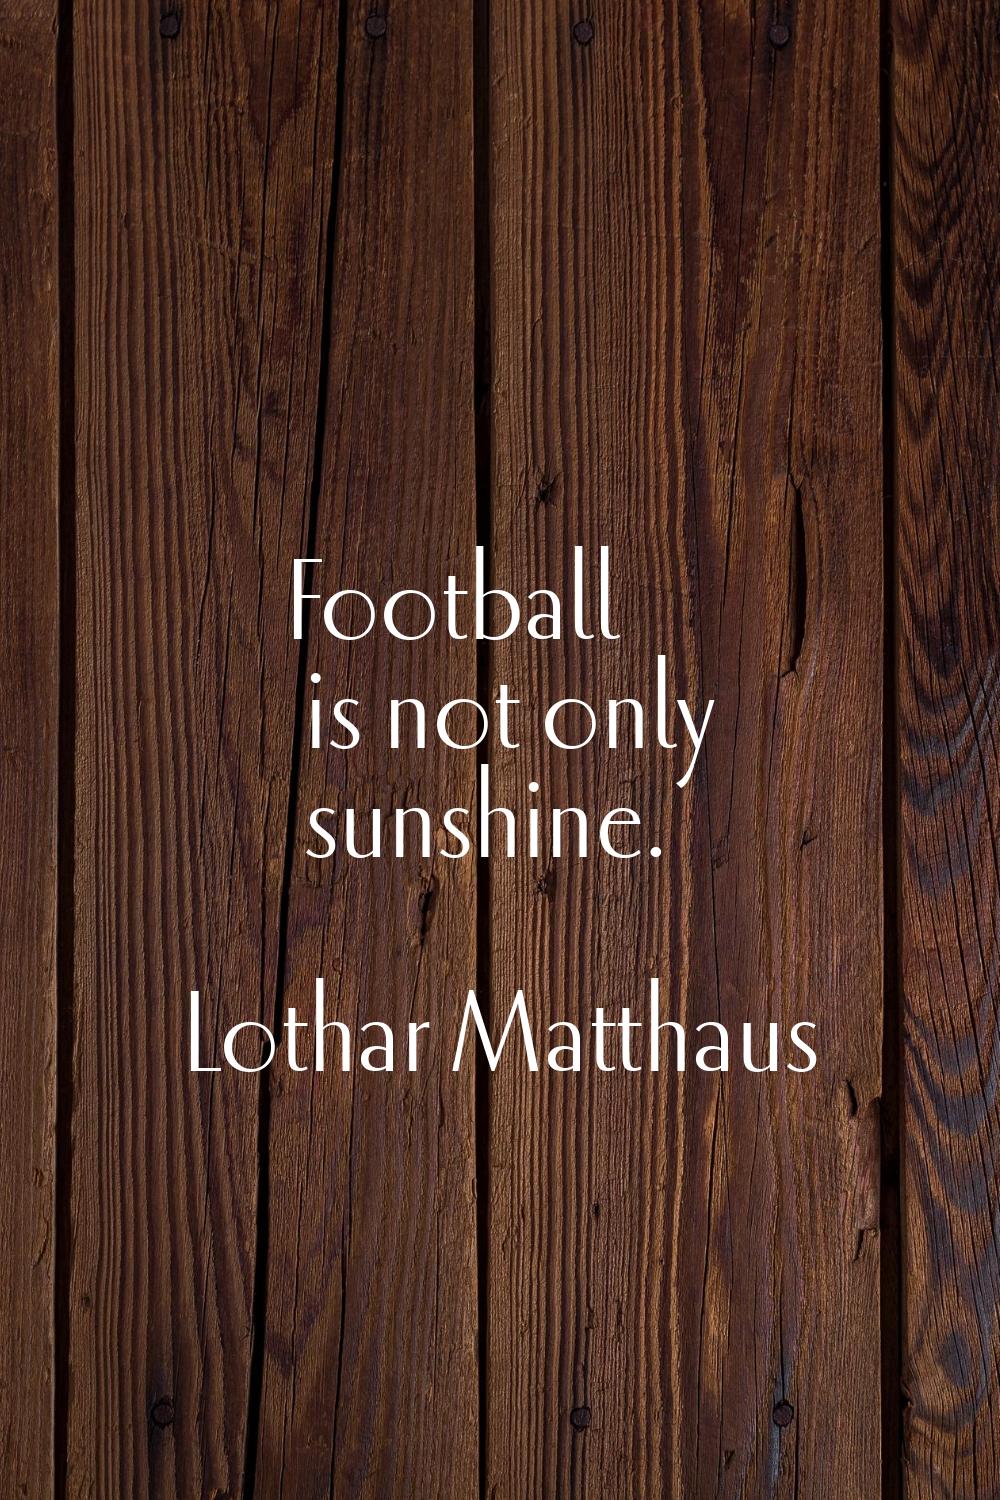 Football is not only sunshine.